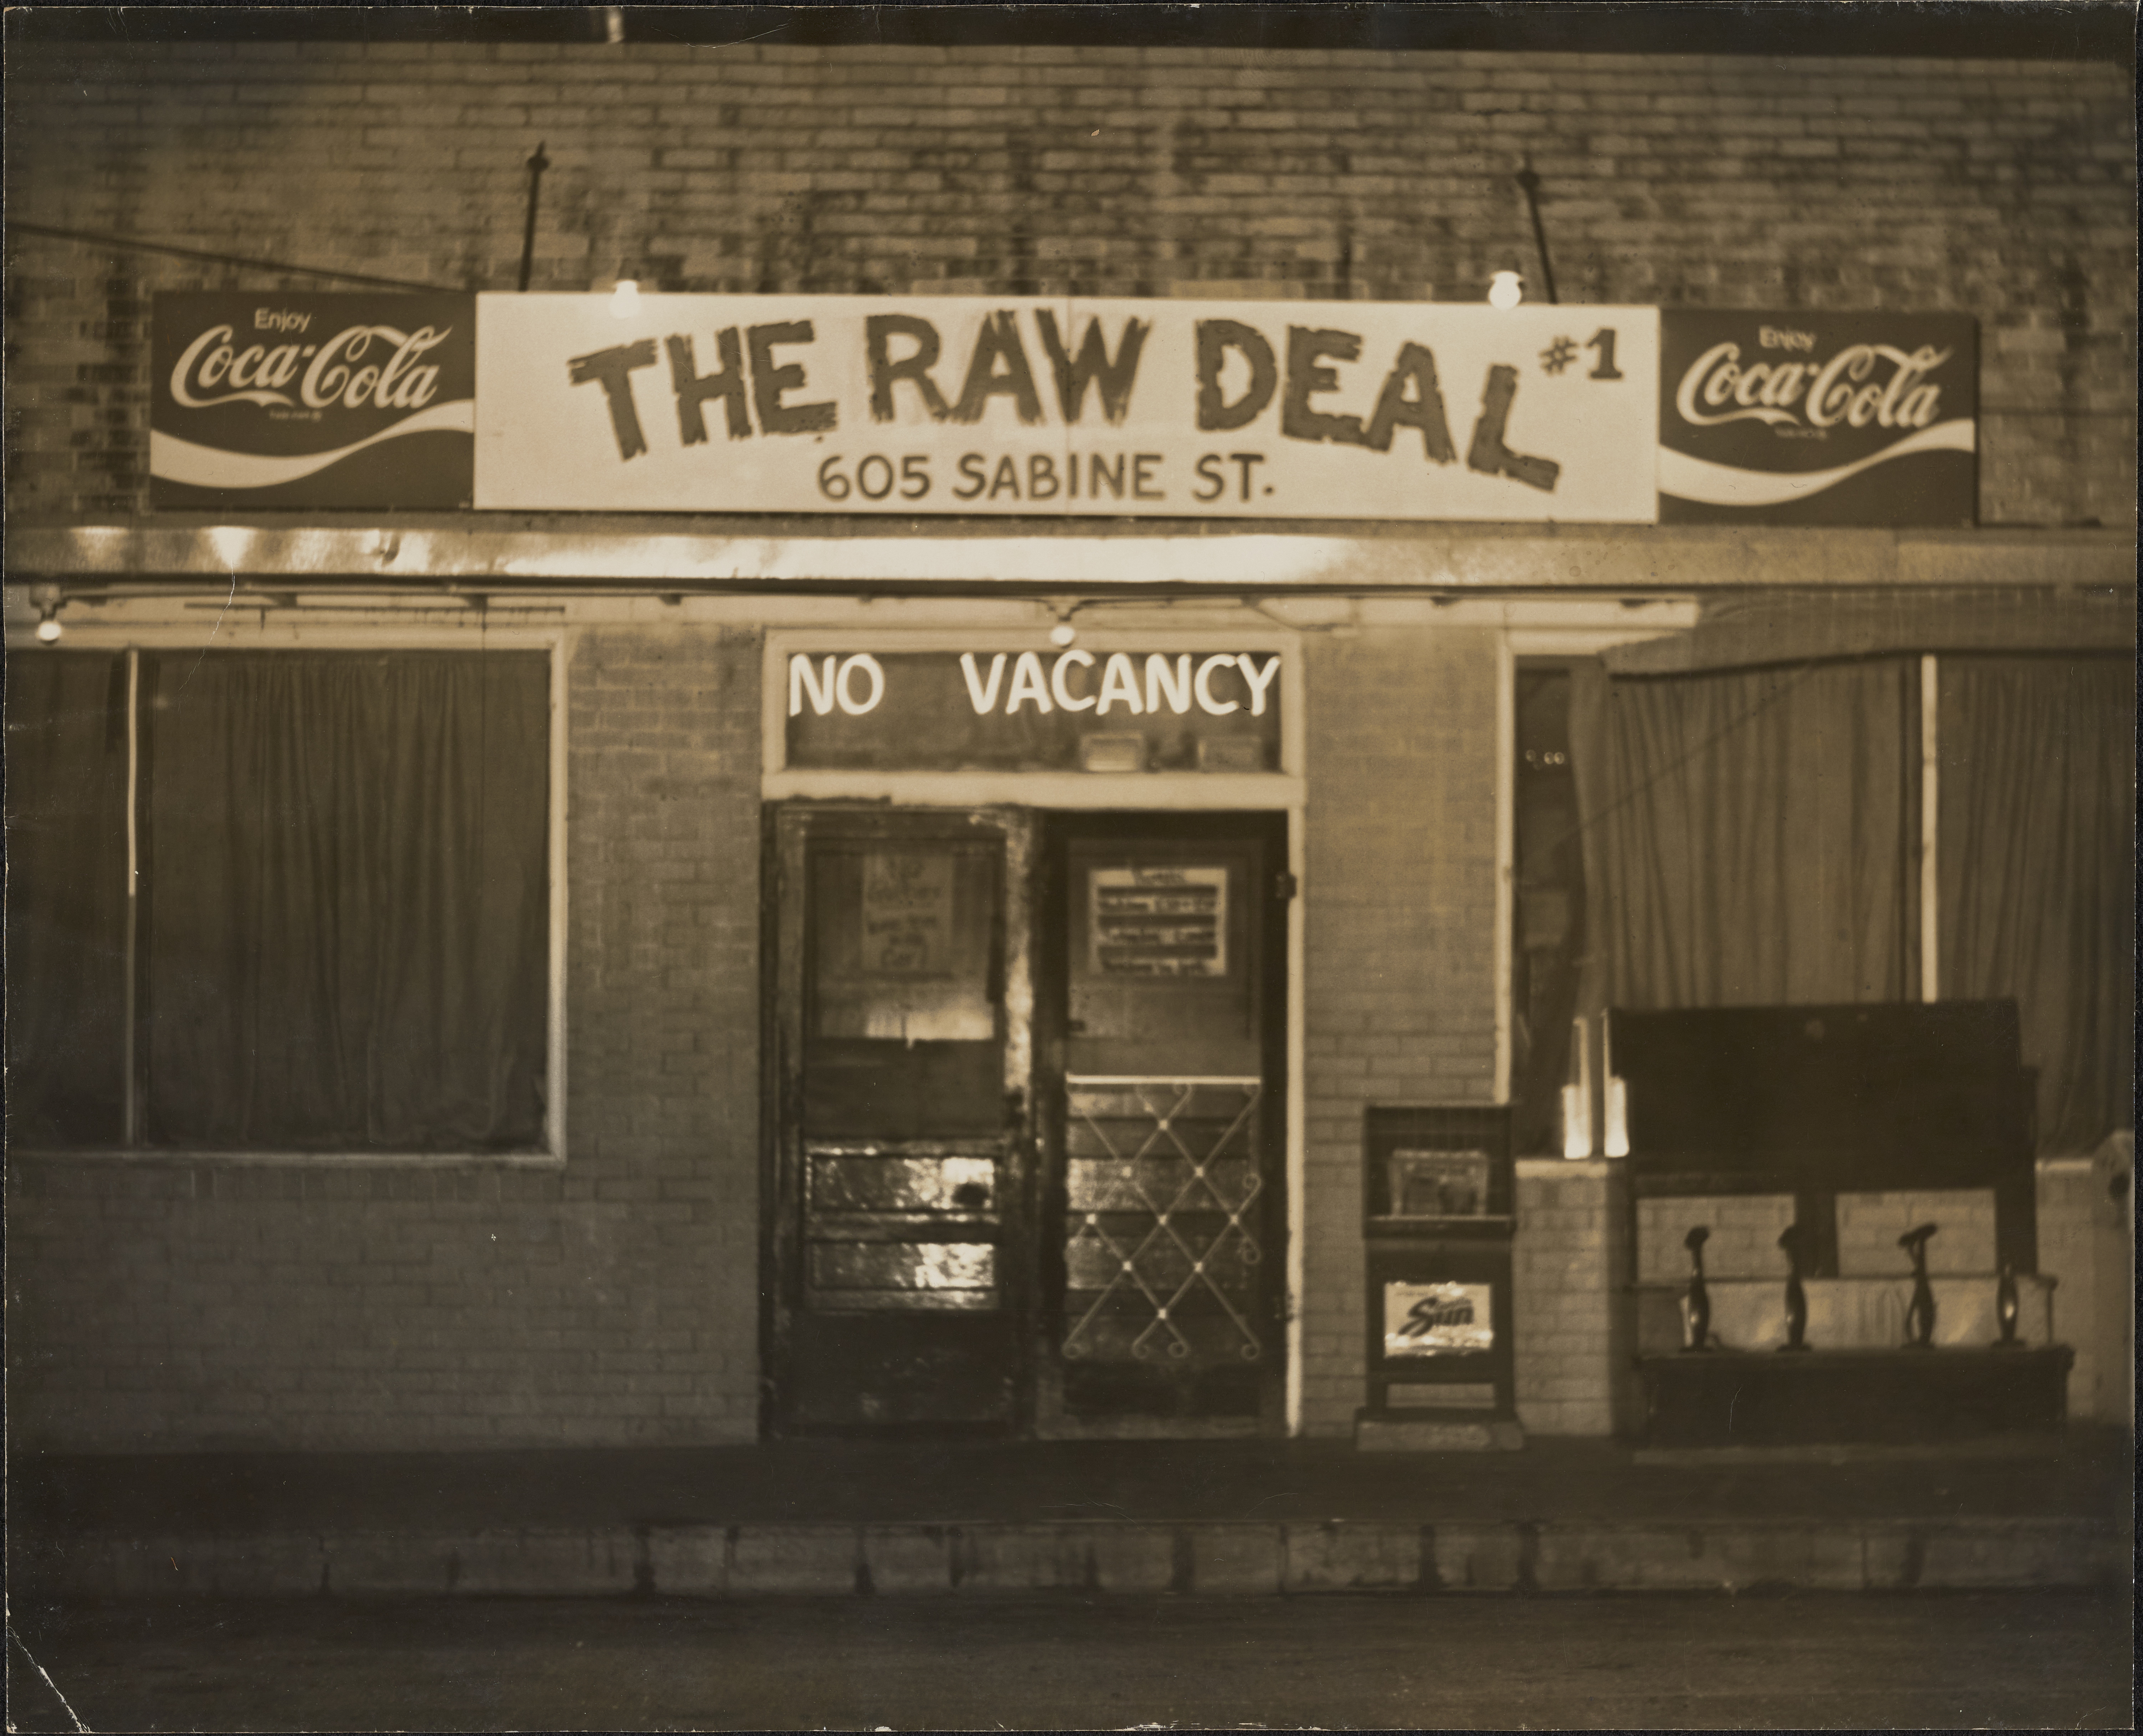 Image of exterior front door of The Raw Deal restaurant and bar.